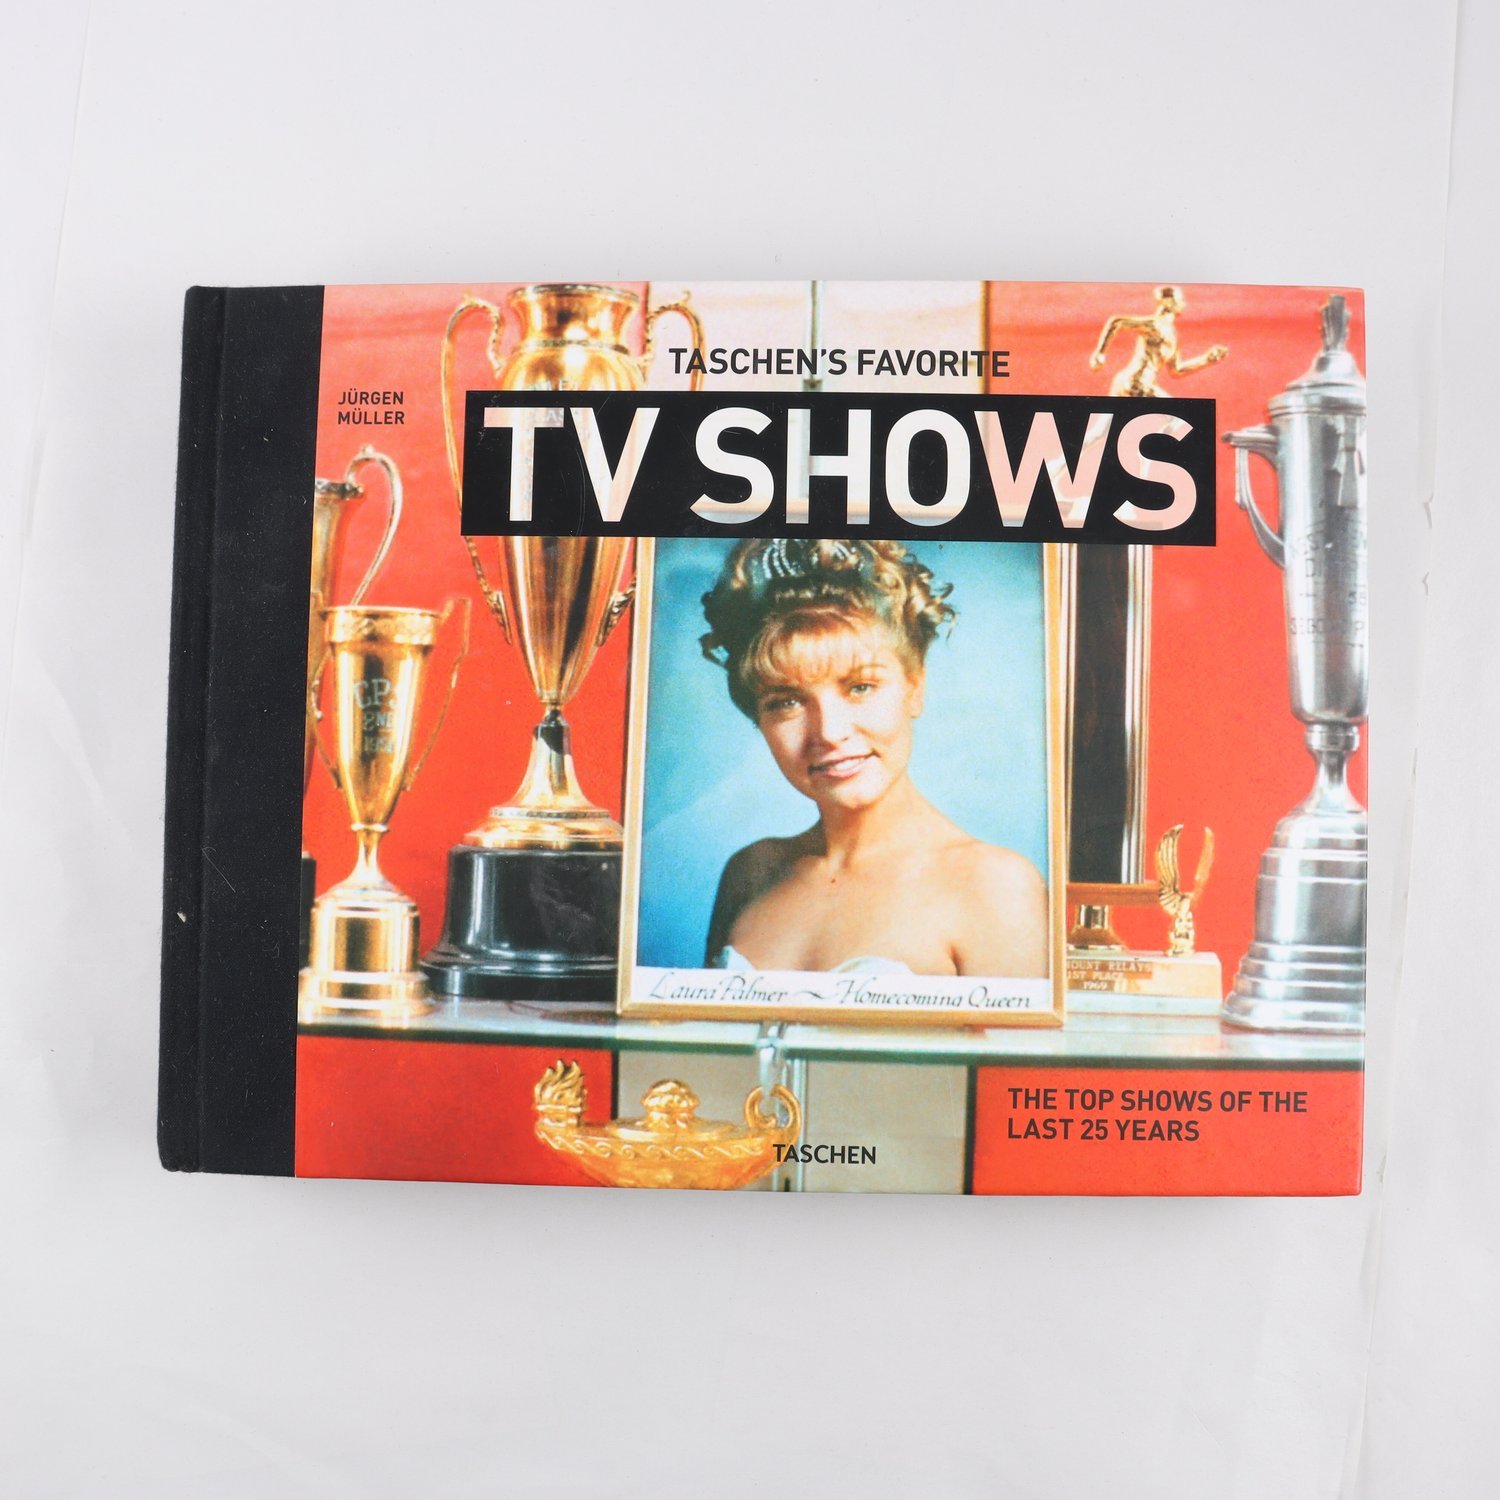 Taschen´s Favorite TV Shows: The Top Shows of the Last 25 Years